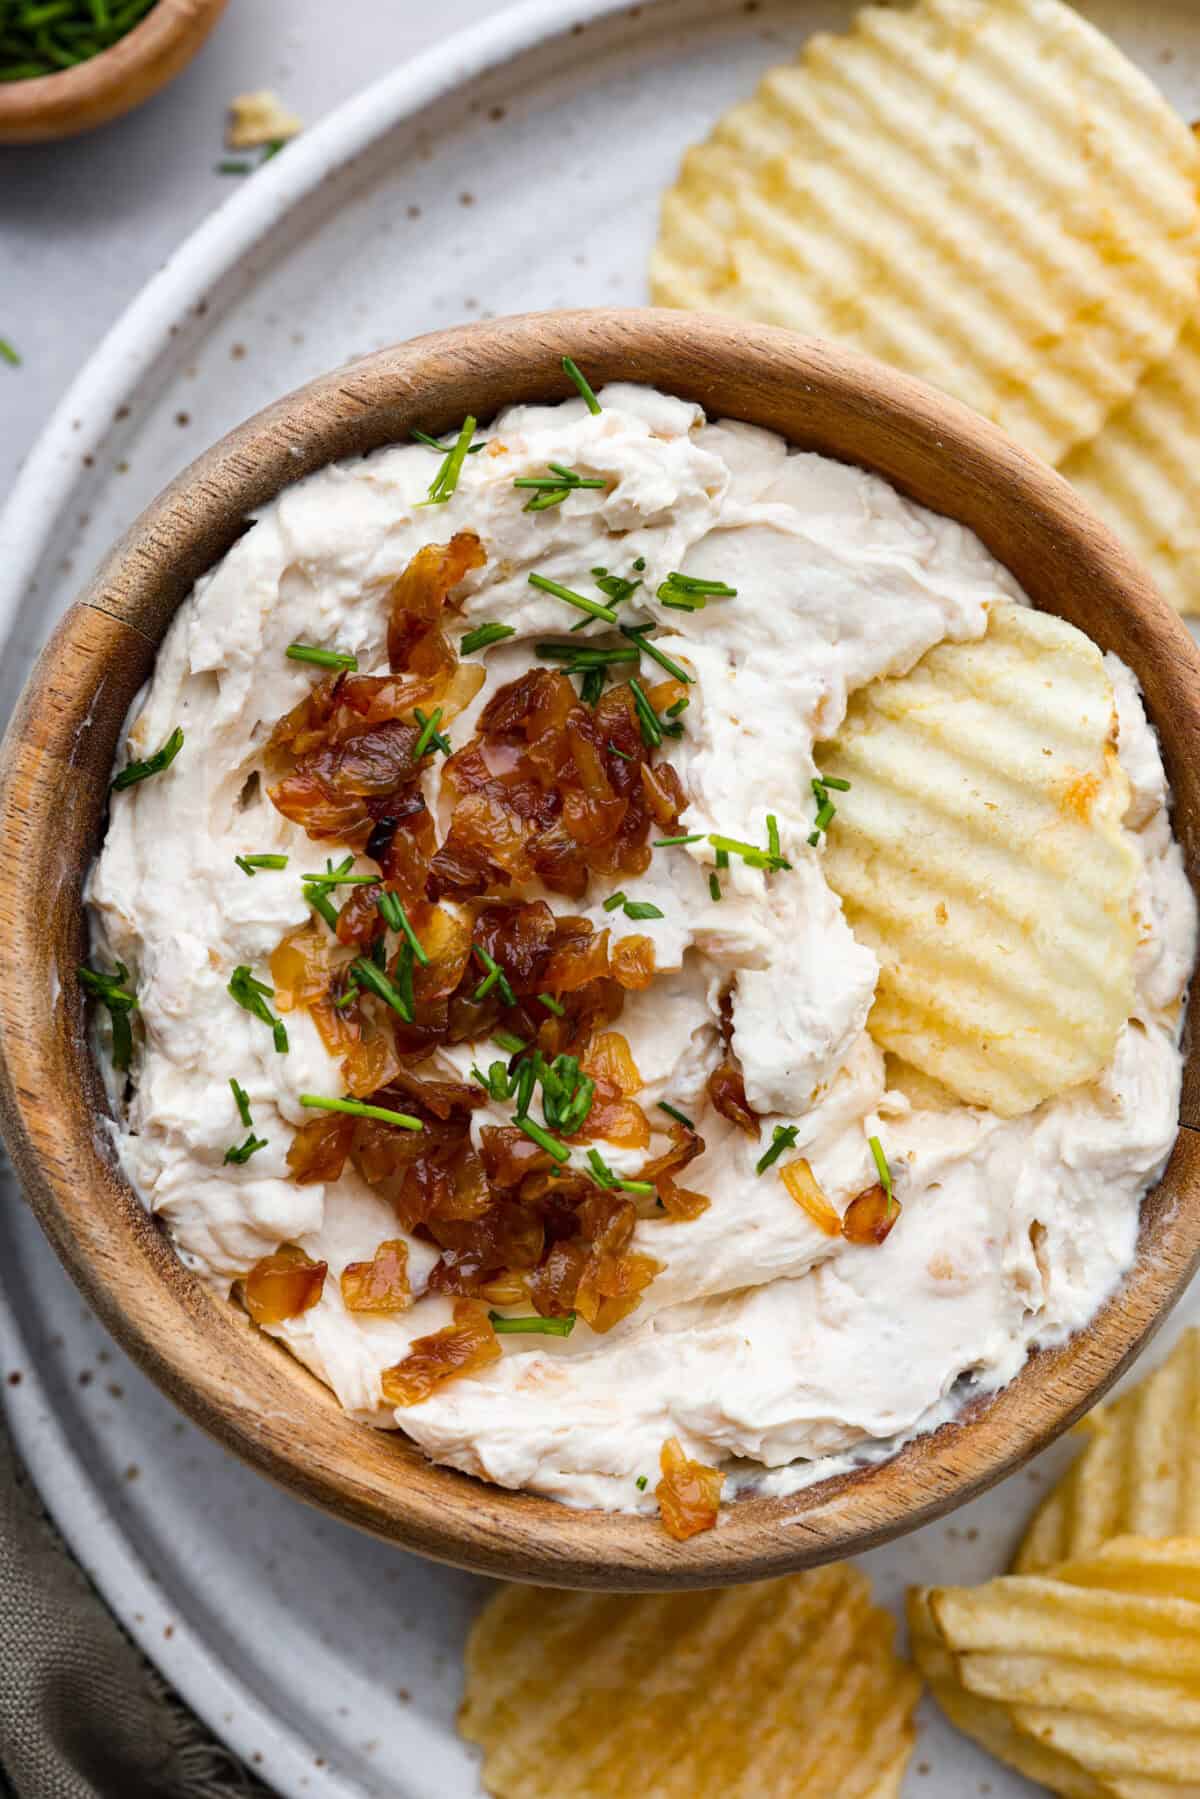 Top view of French onion dip garnished with caramelized onions and a chip on top.